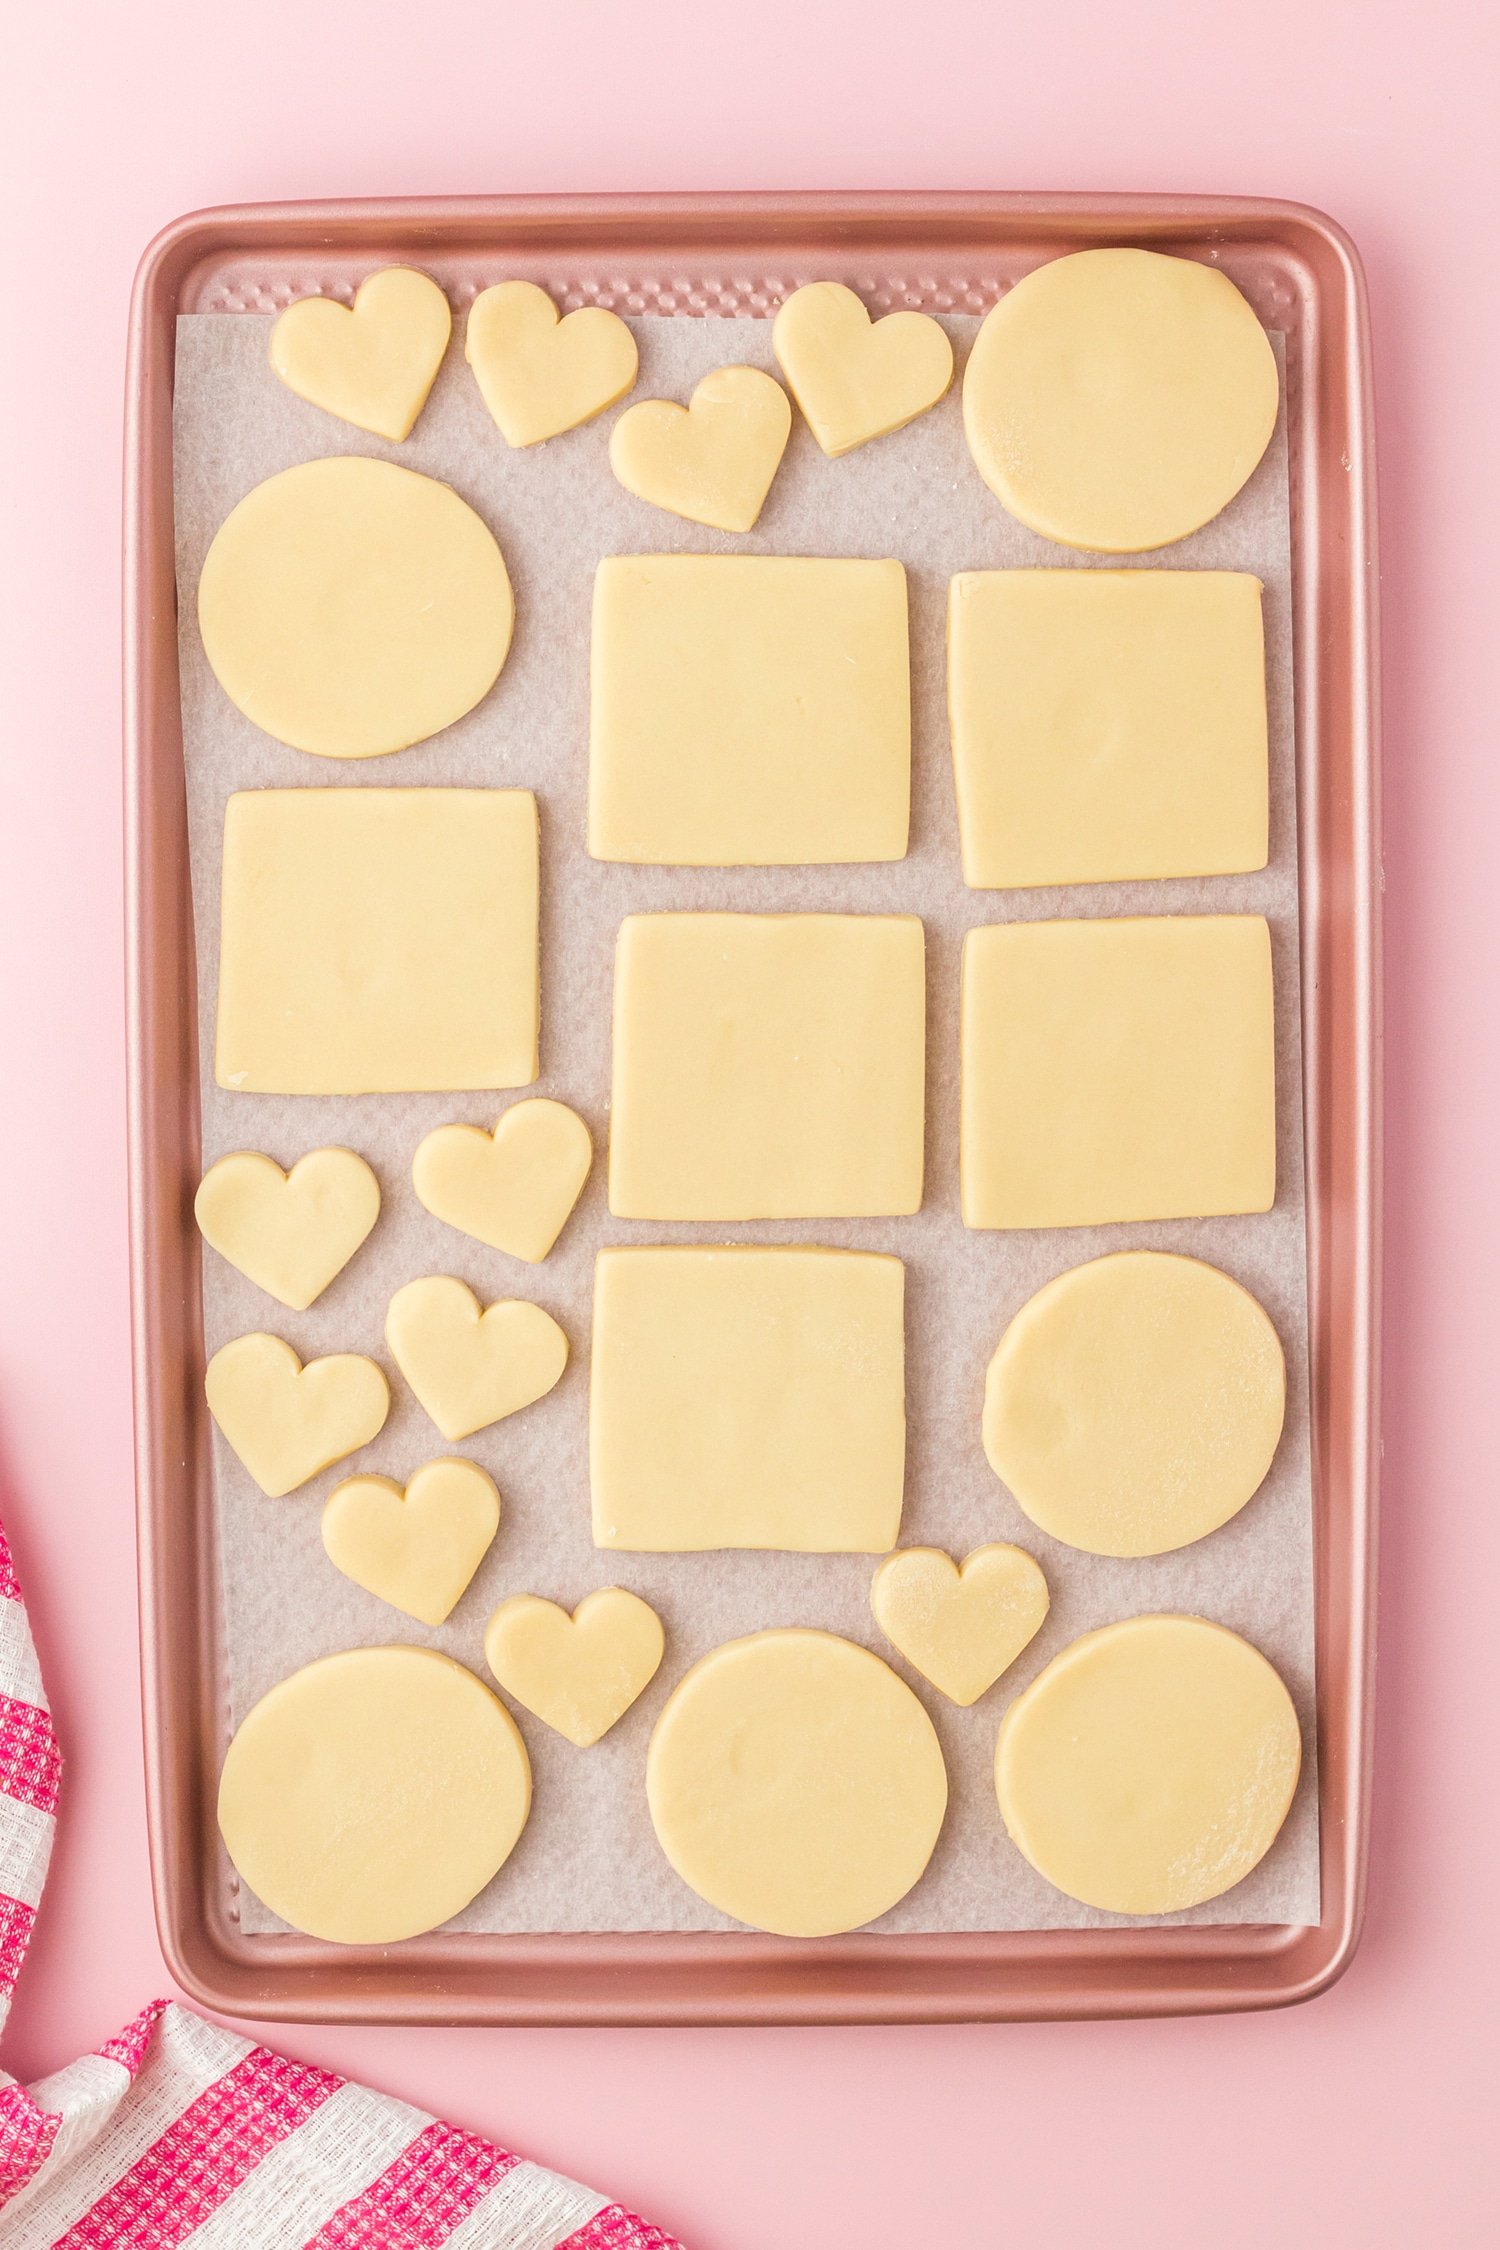 unbaked sugar cookie dough in heart, circle, and square shapes on pink baking sheet